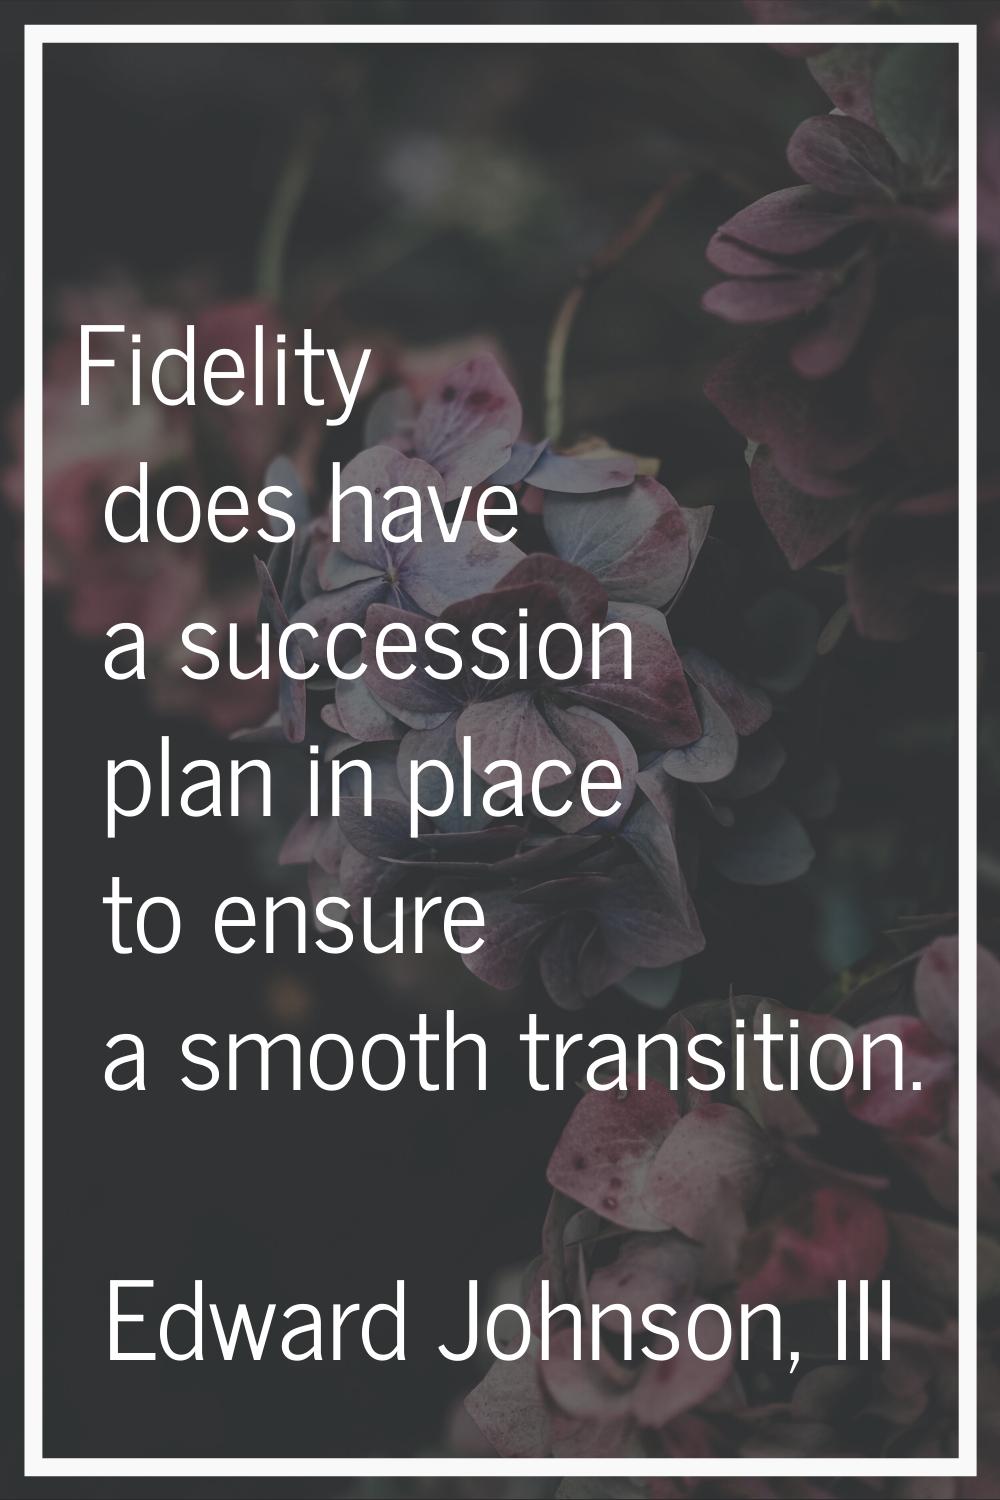 Fidelity does have a succession plan in place to ensure a smooth transition.